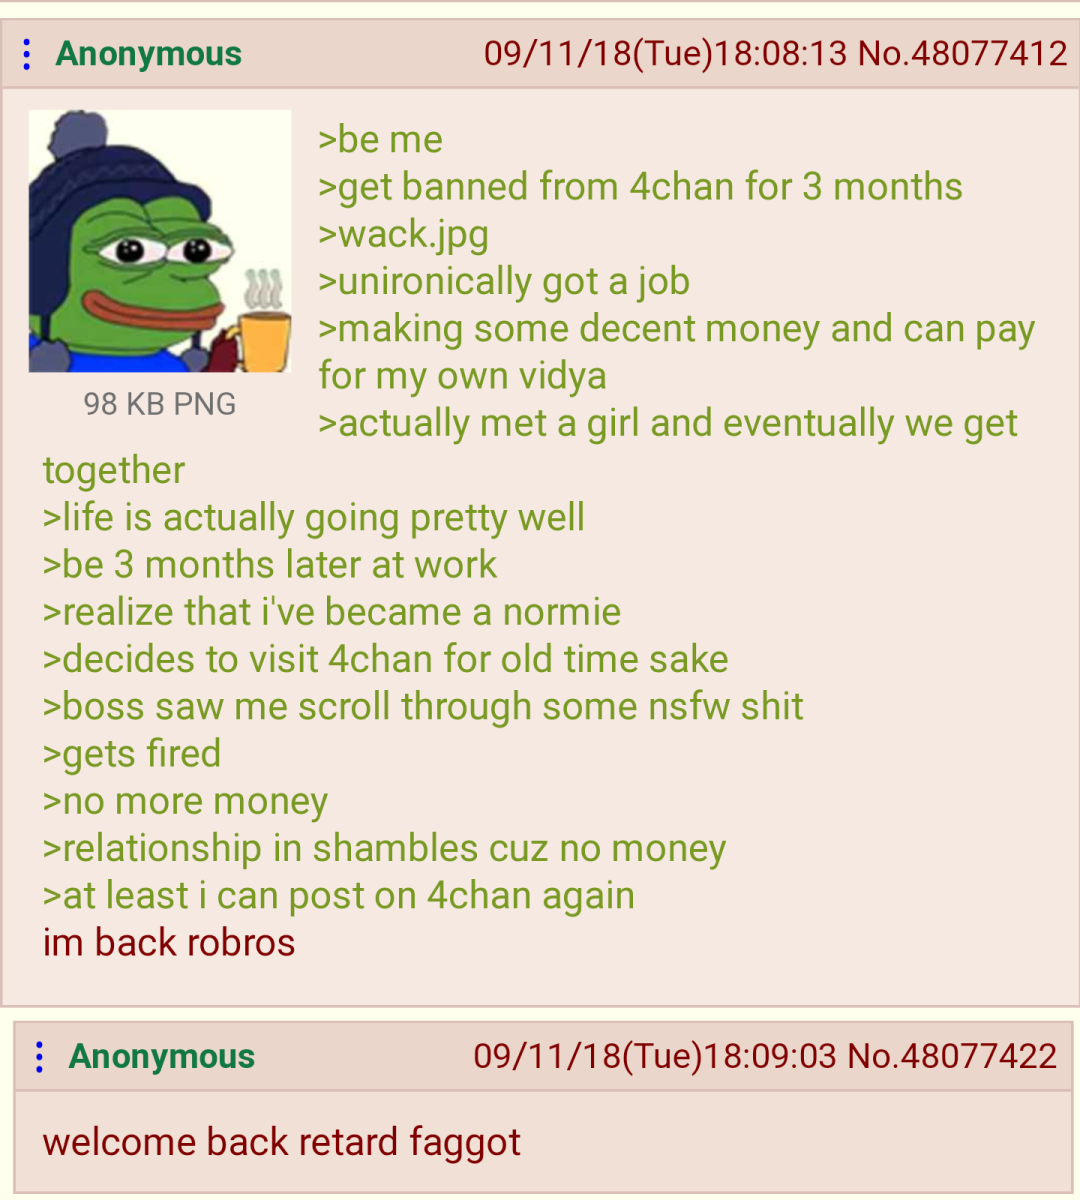 Anon gets banned from 4chan